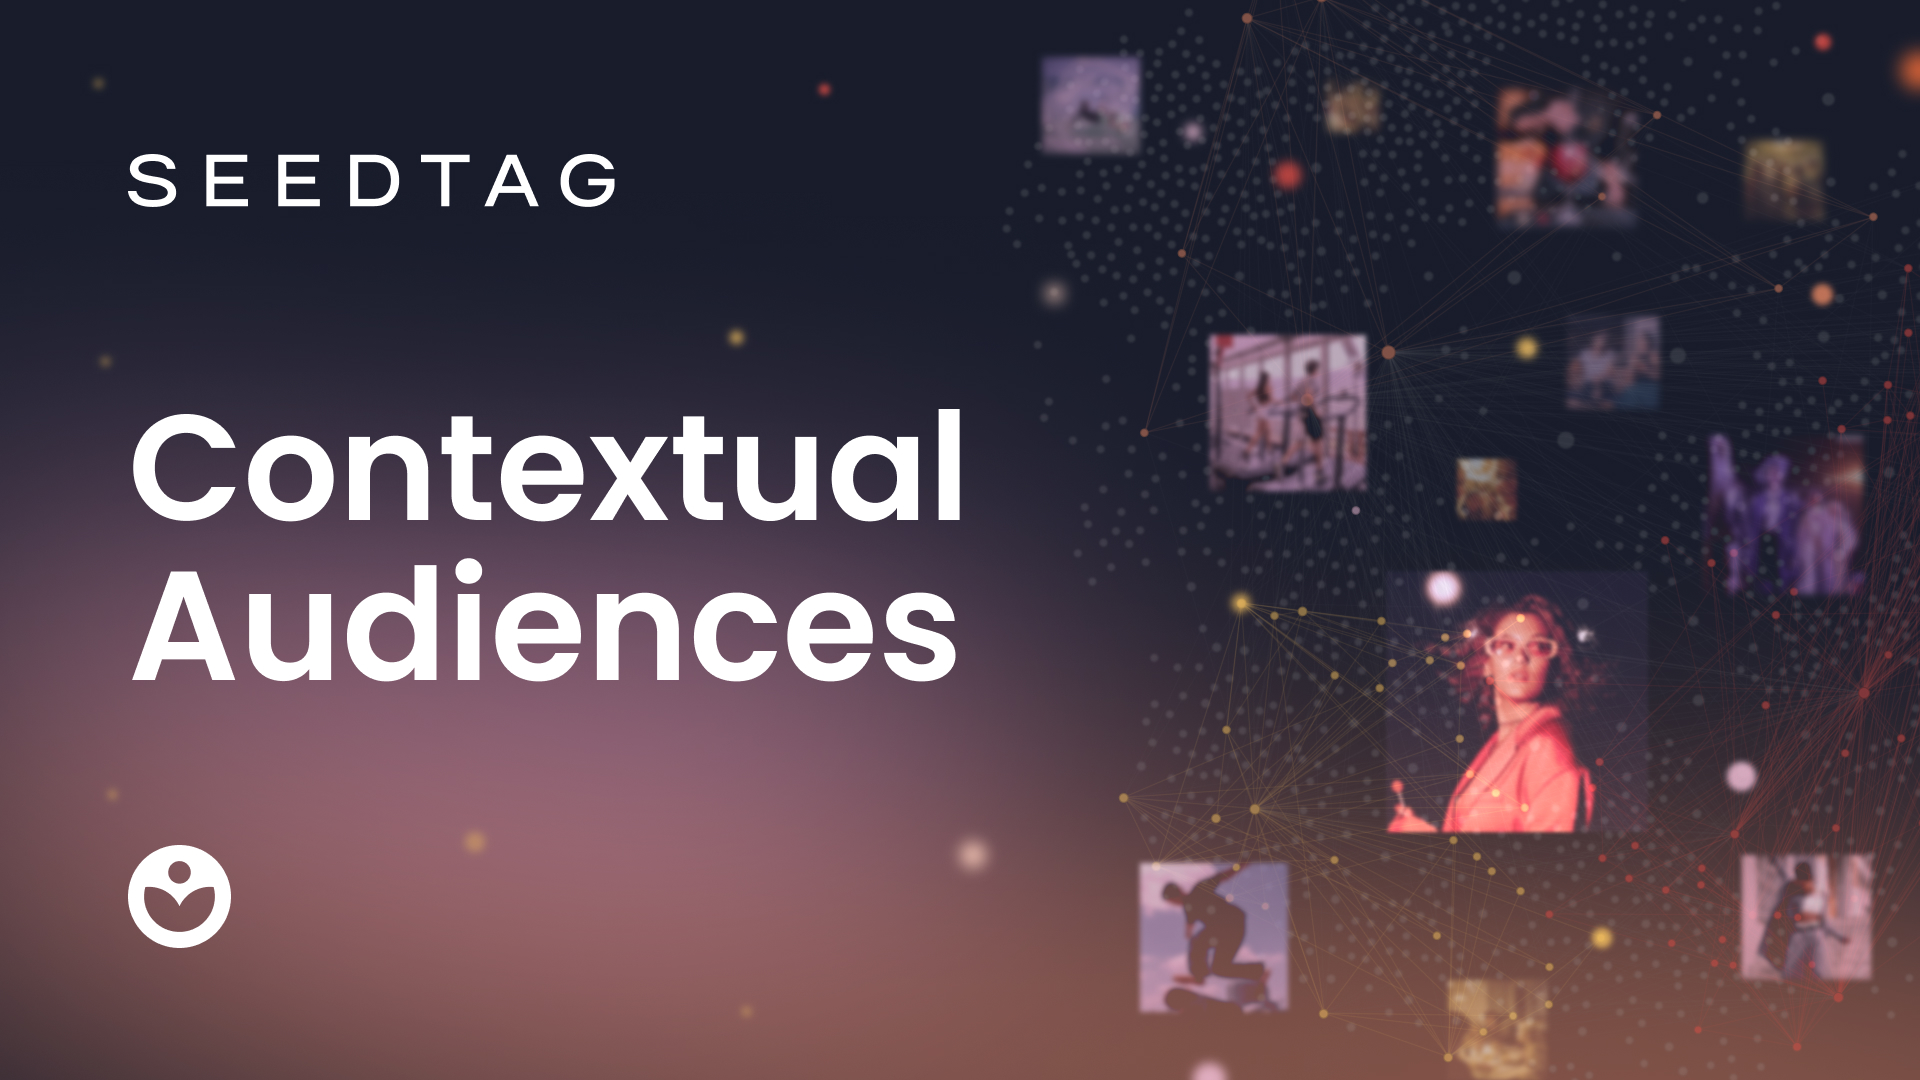 Seedtag's New Contextual Audiences Connect Brands with Unique Consumer Interests